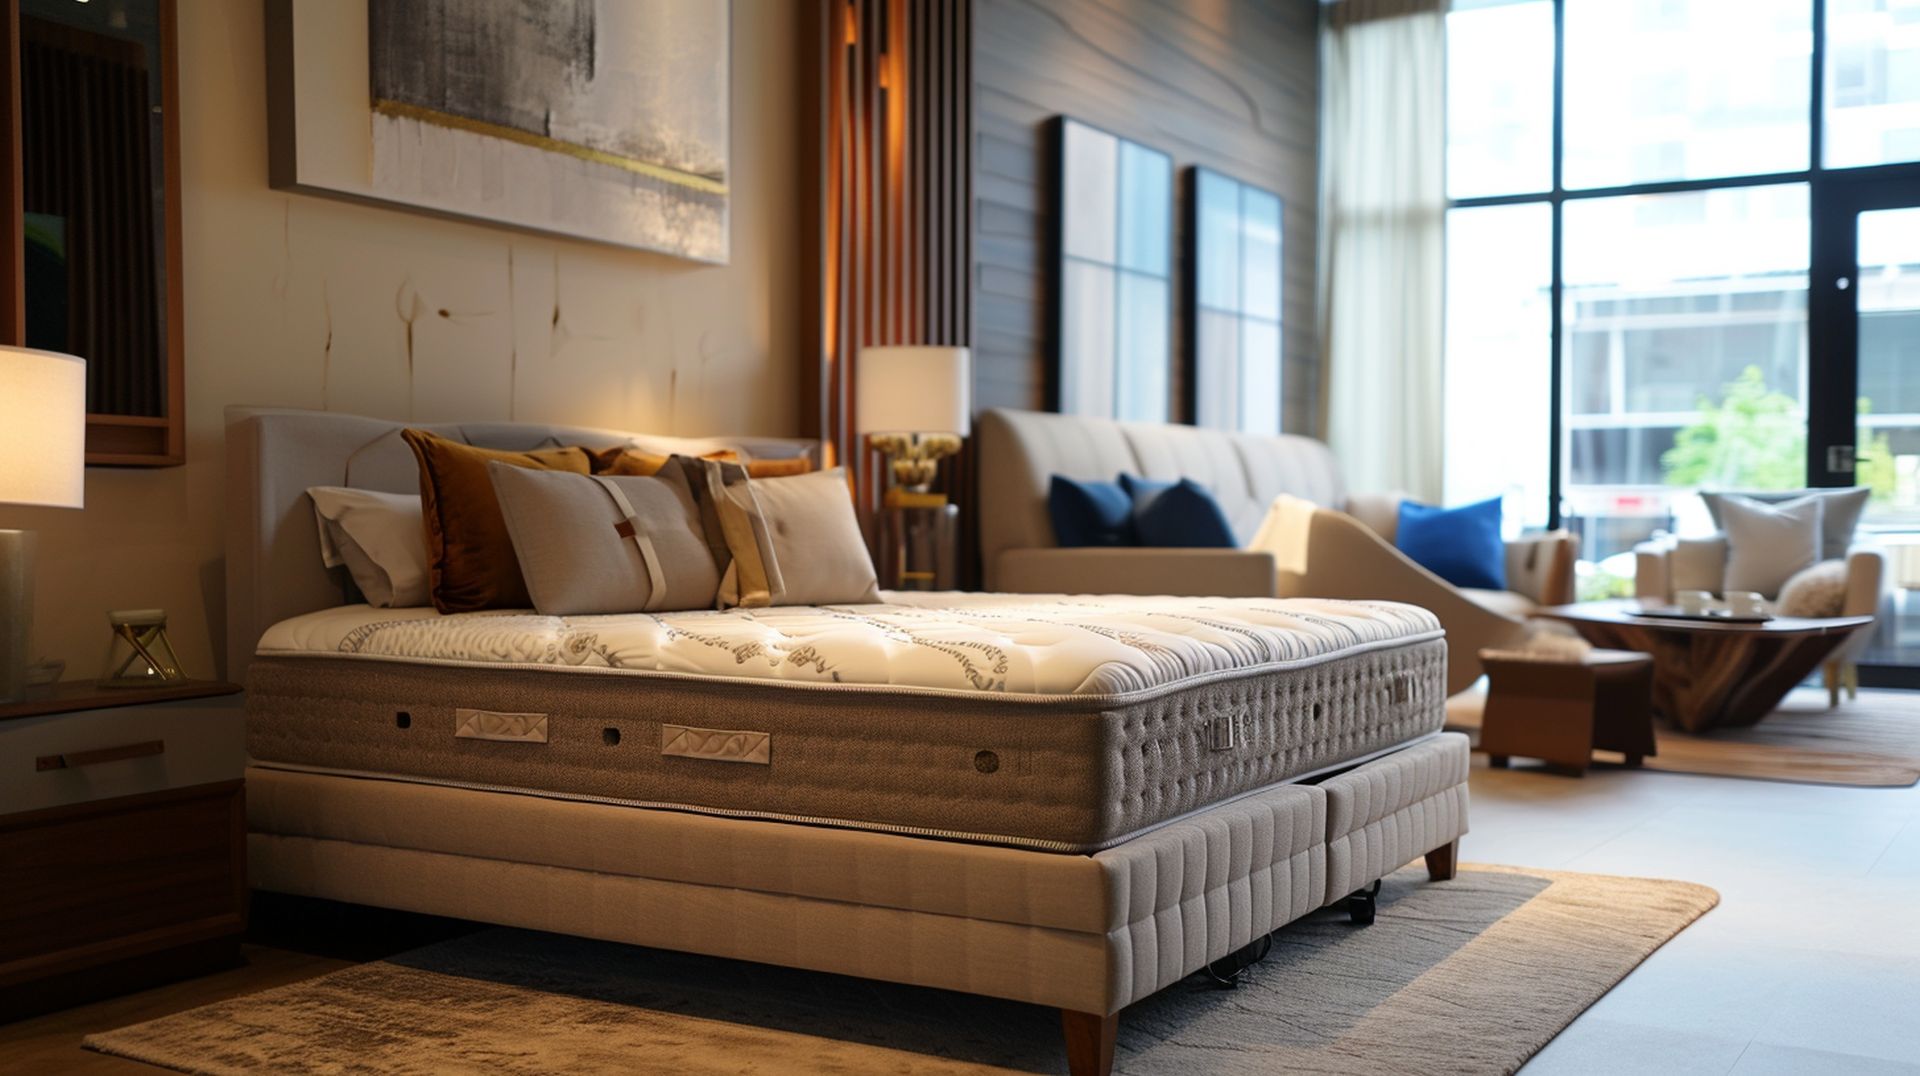 If you're looking for a new bed, mattress stores in Rock Hill offer the best customer and delivery service, financing, and warranties in South Carolina